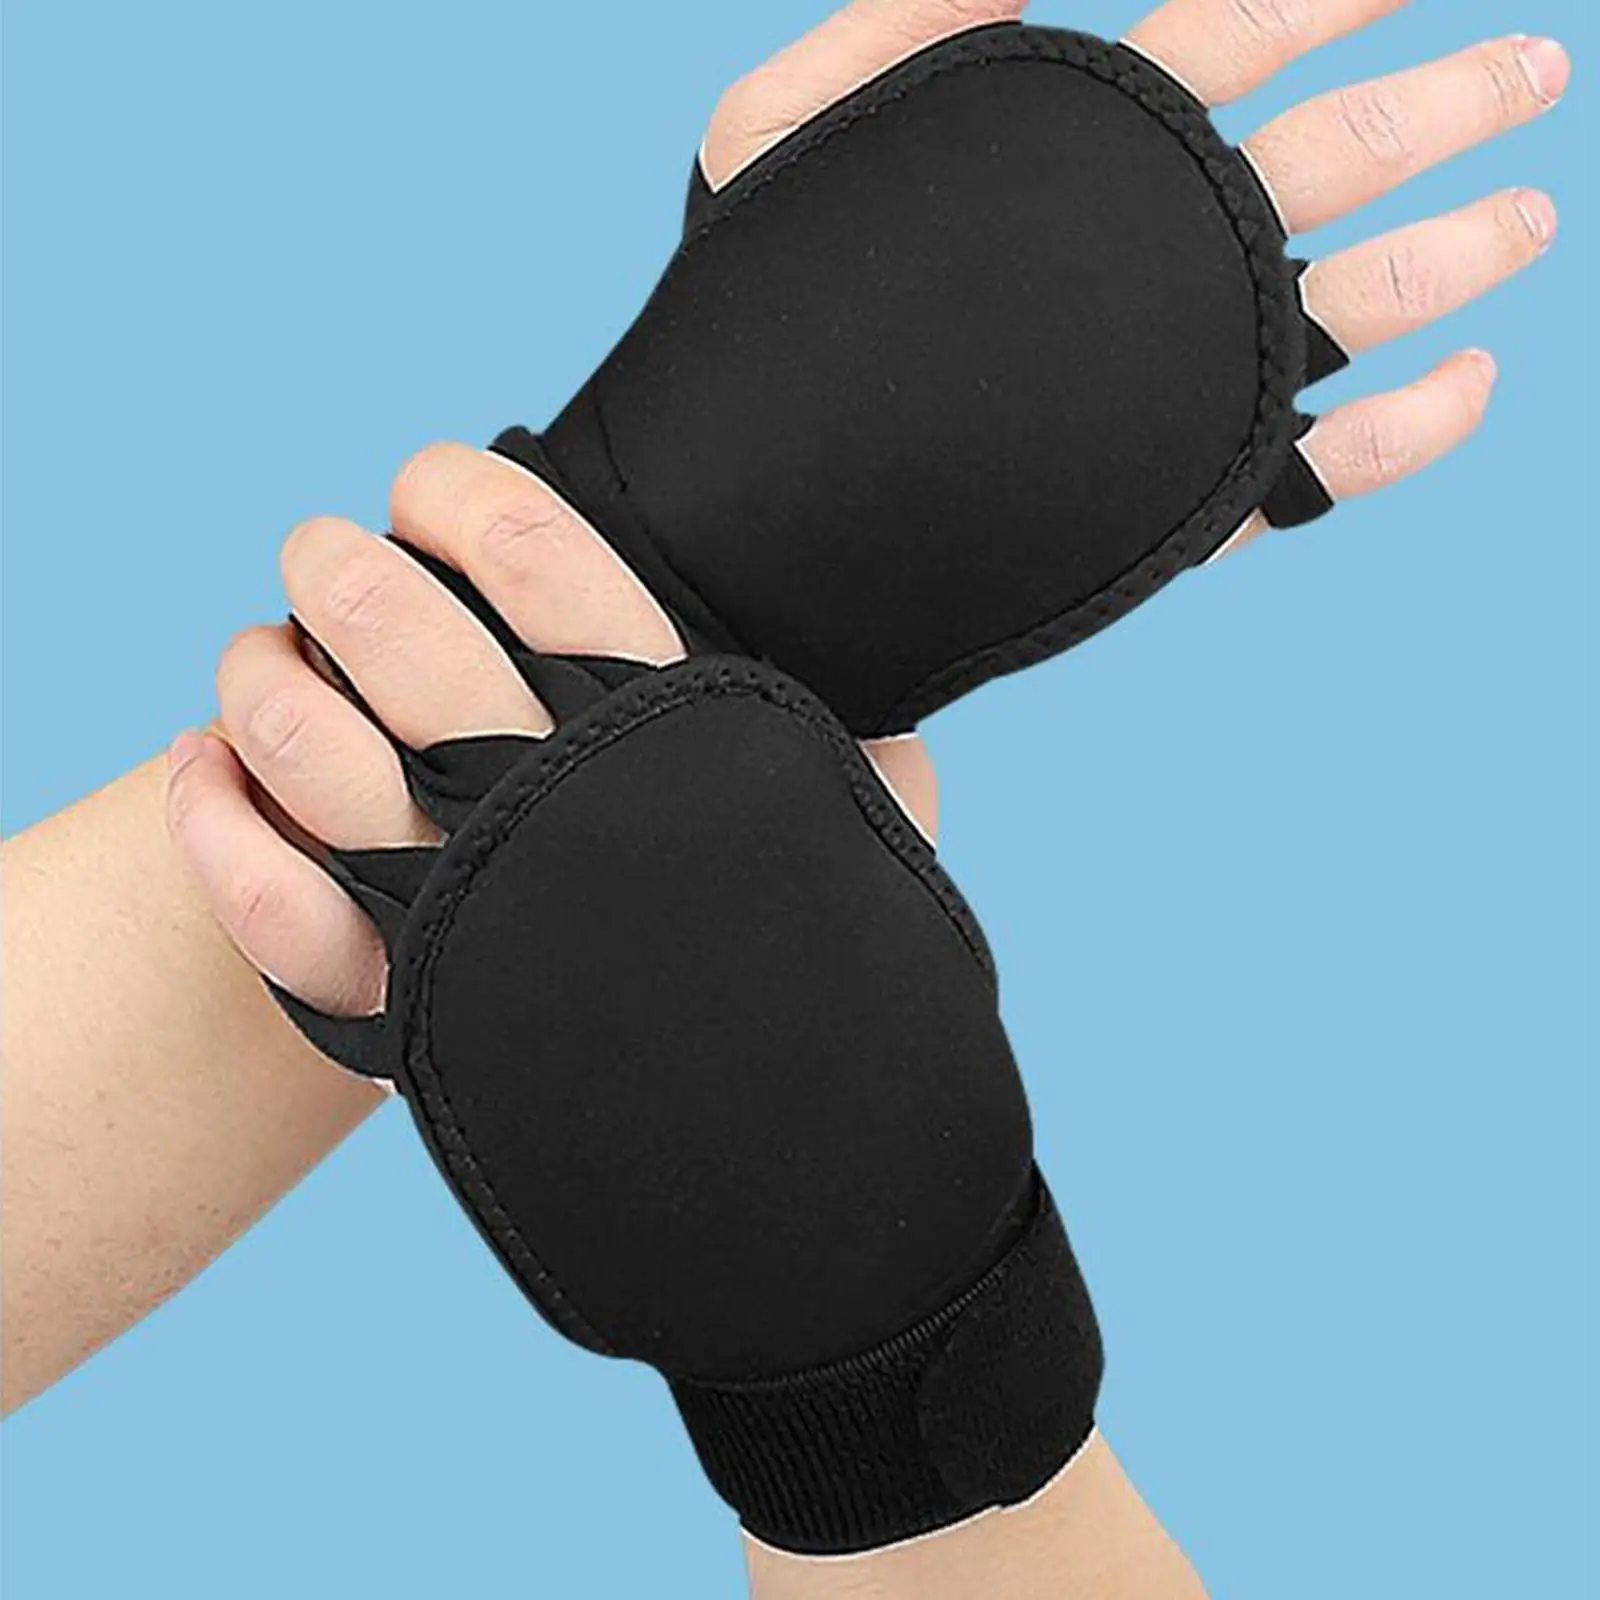 Weightlifting Gloves Ventilated Palm Protection Hand Grips Workout Gloves